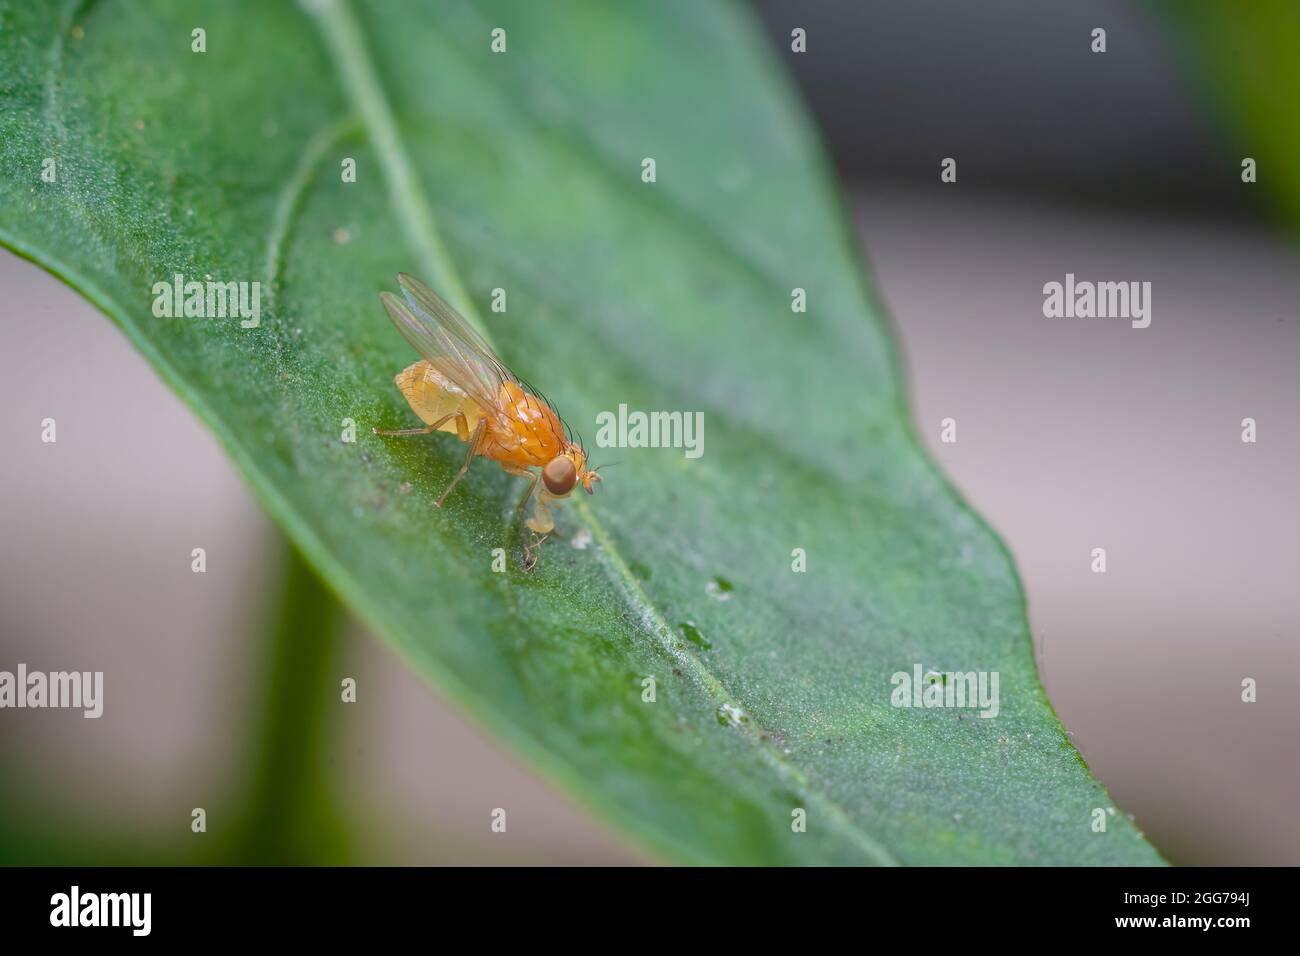 Macro photo of Little yellow-orange fly on the leaf of the plant. Used selective focus. Stock Photo